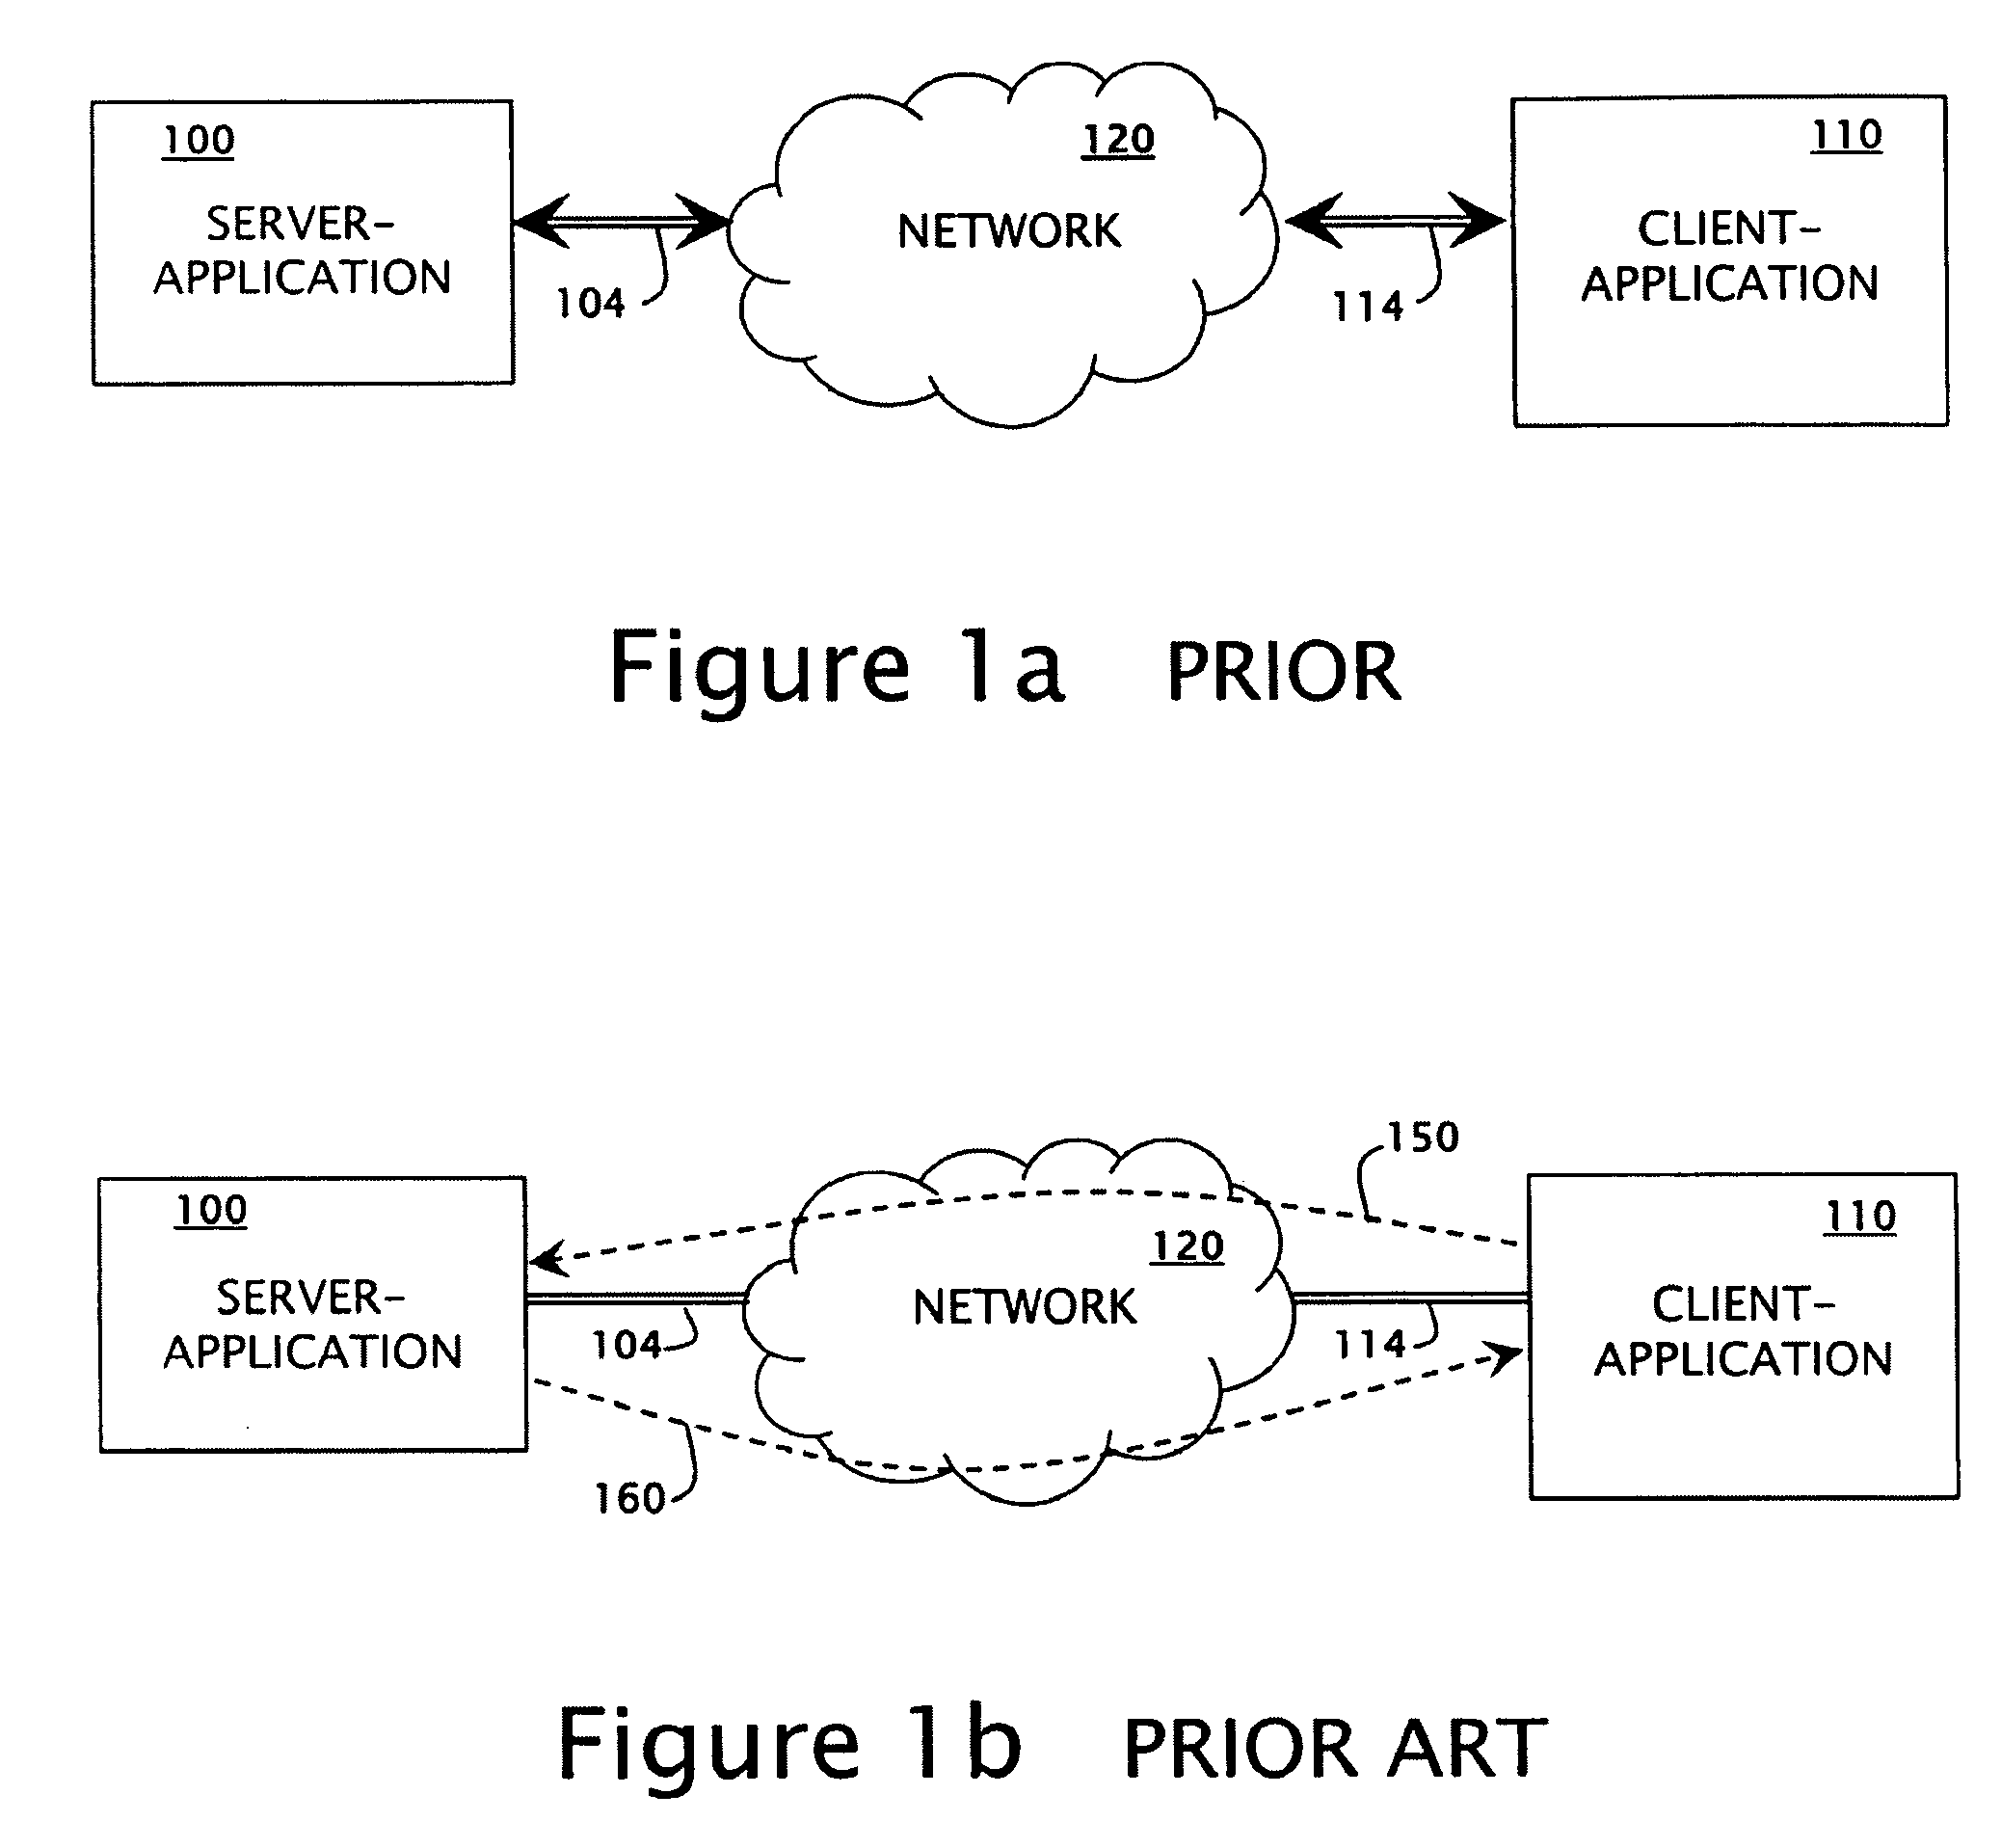 Soft denial of application actions over the network communications